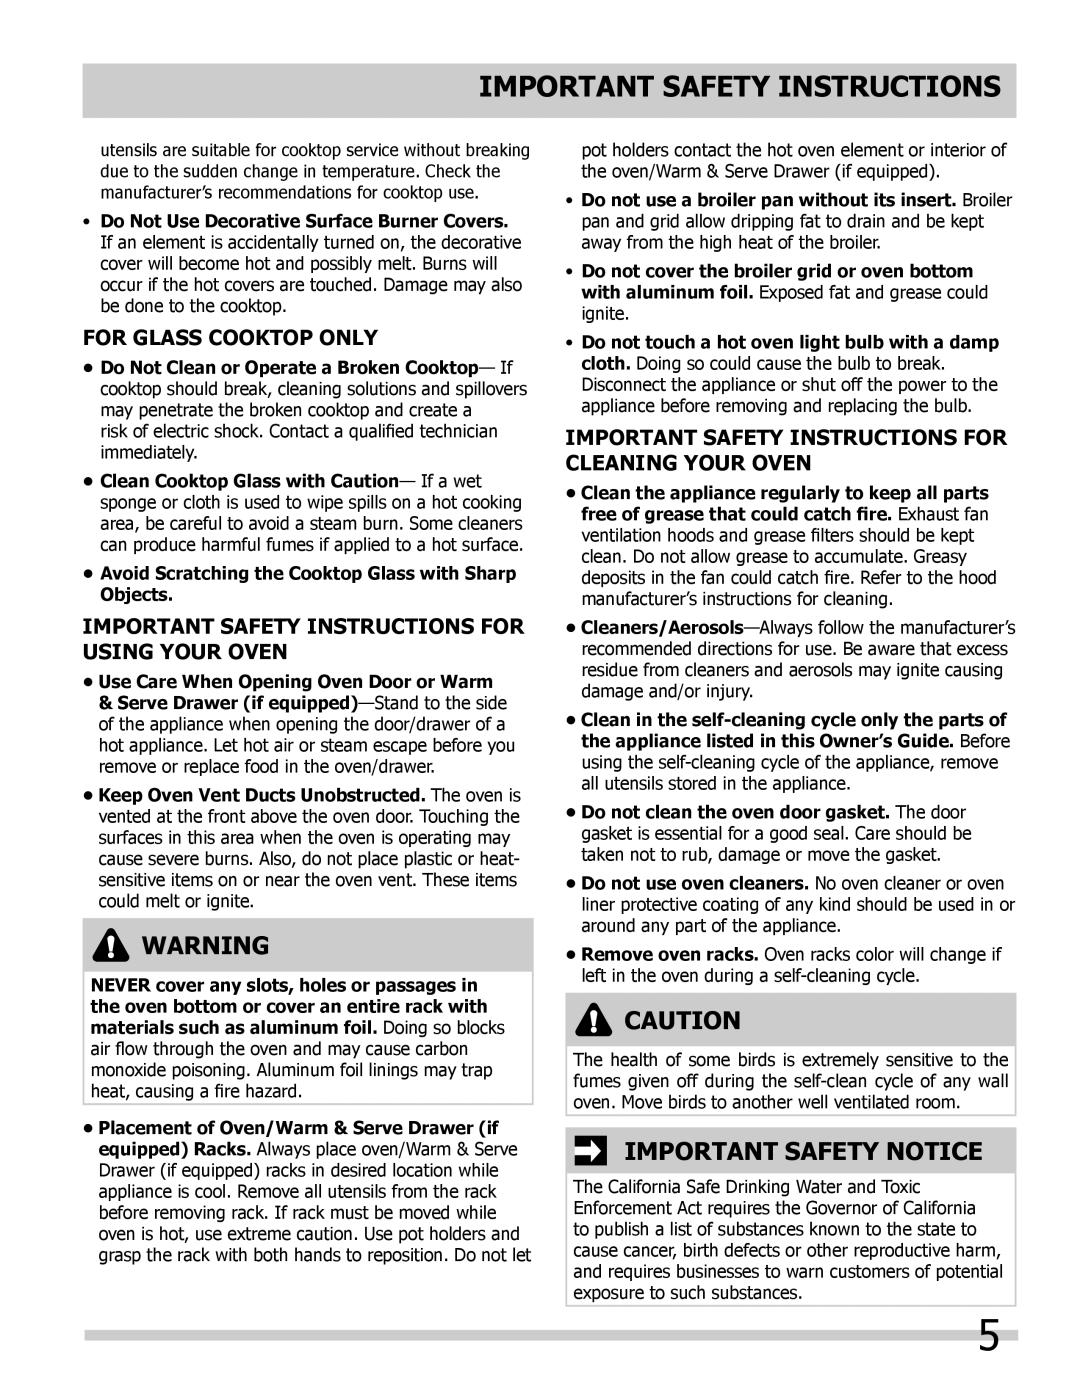 Frigidaire FGES3065KW Important Safety Notice, For Glass Cooktop Only, Important Safety Instructions For Using Your Oven 